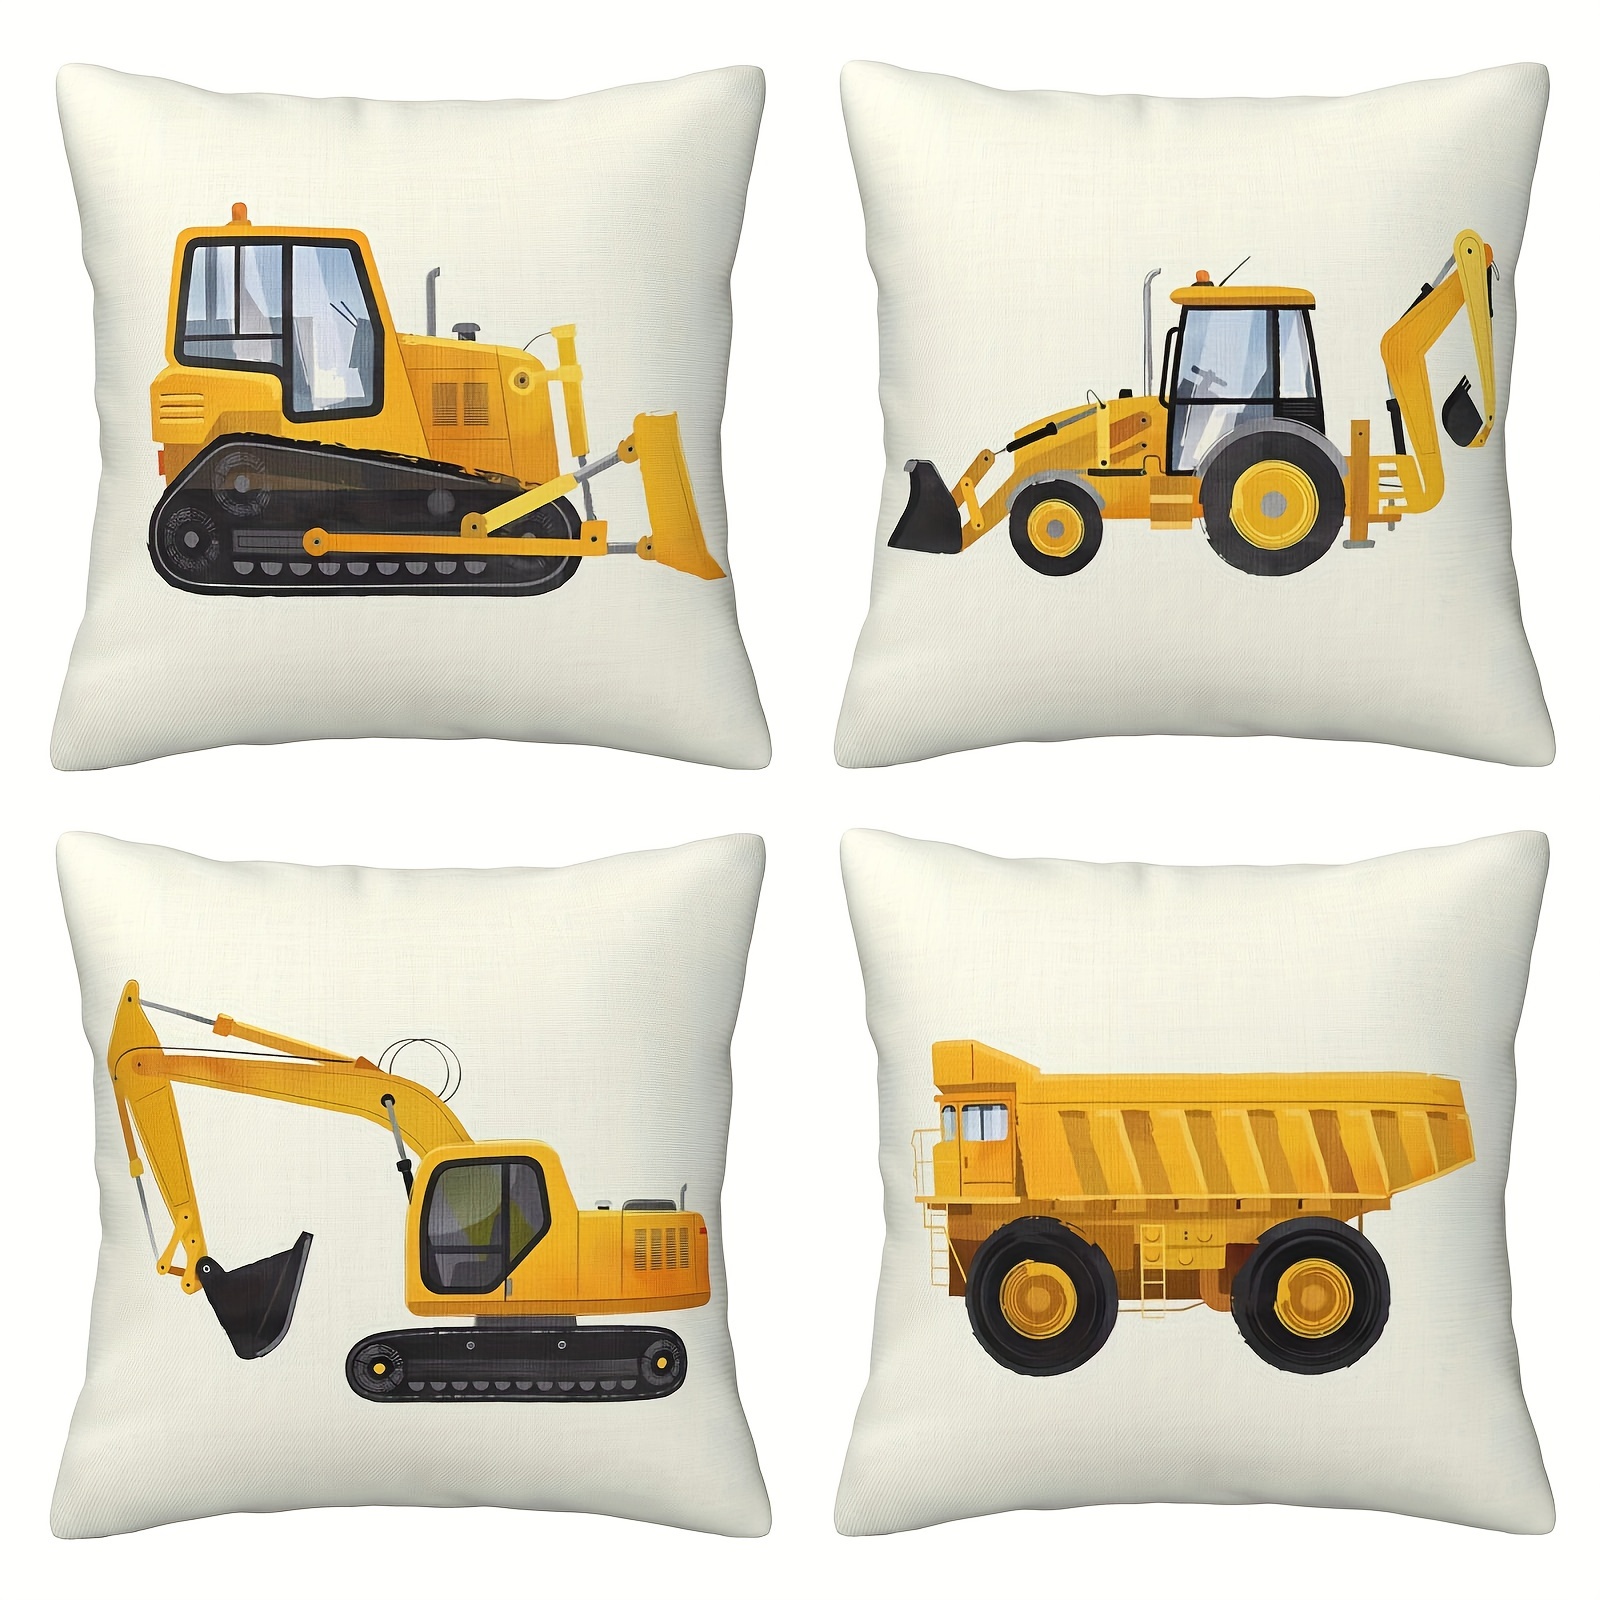 

4pcs Set Of Construction Trucks Printed Linen Blend Throw Pillow Covers - Zippered, Easy-care Cushion Cases For Modern & Farmhouse Decor, Perfect For Sofa, Bed, And Car